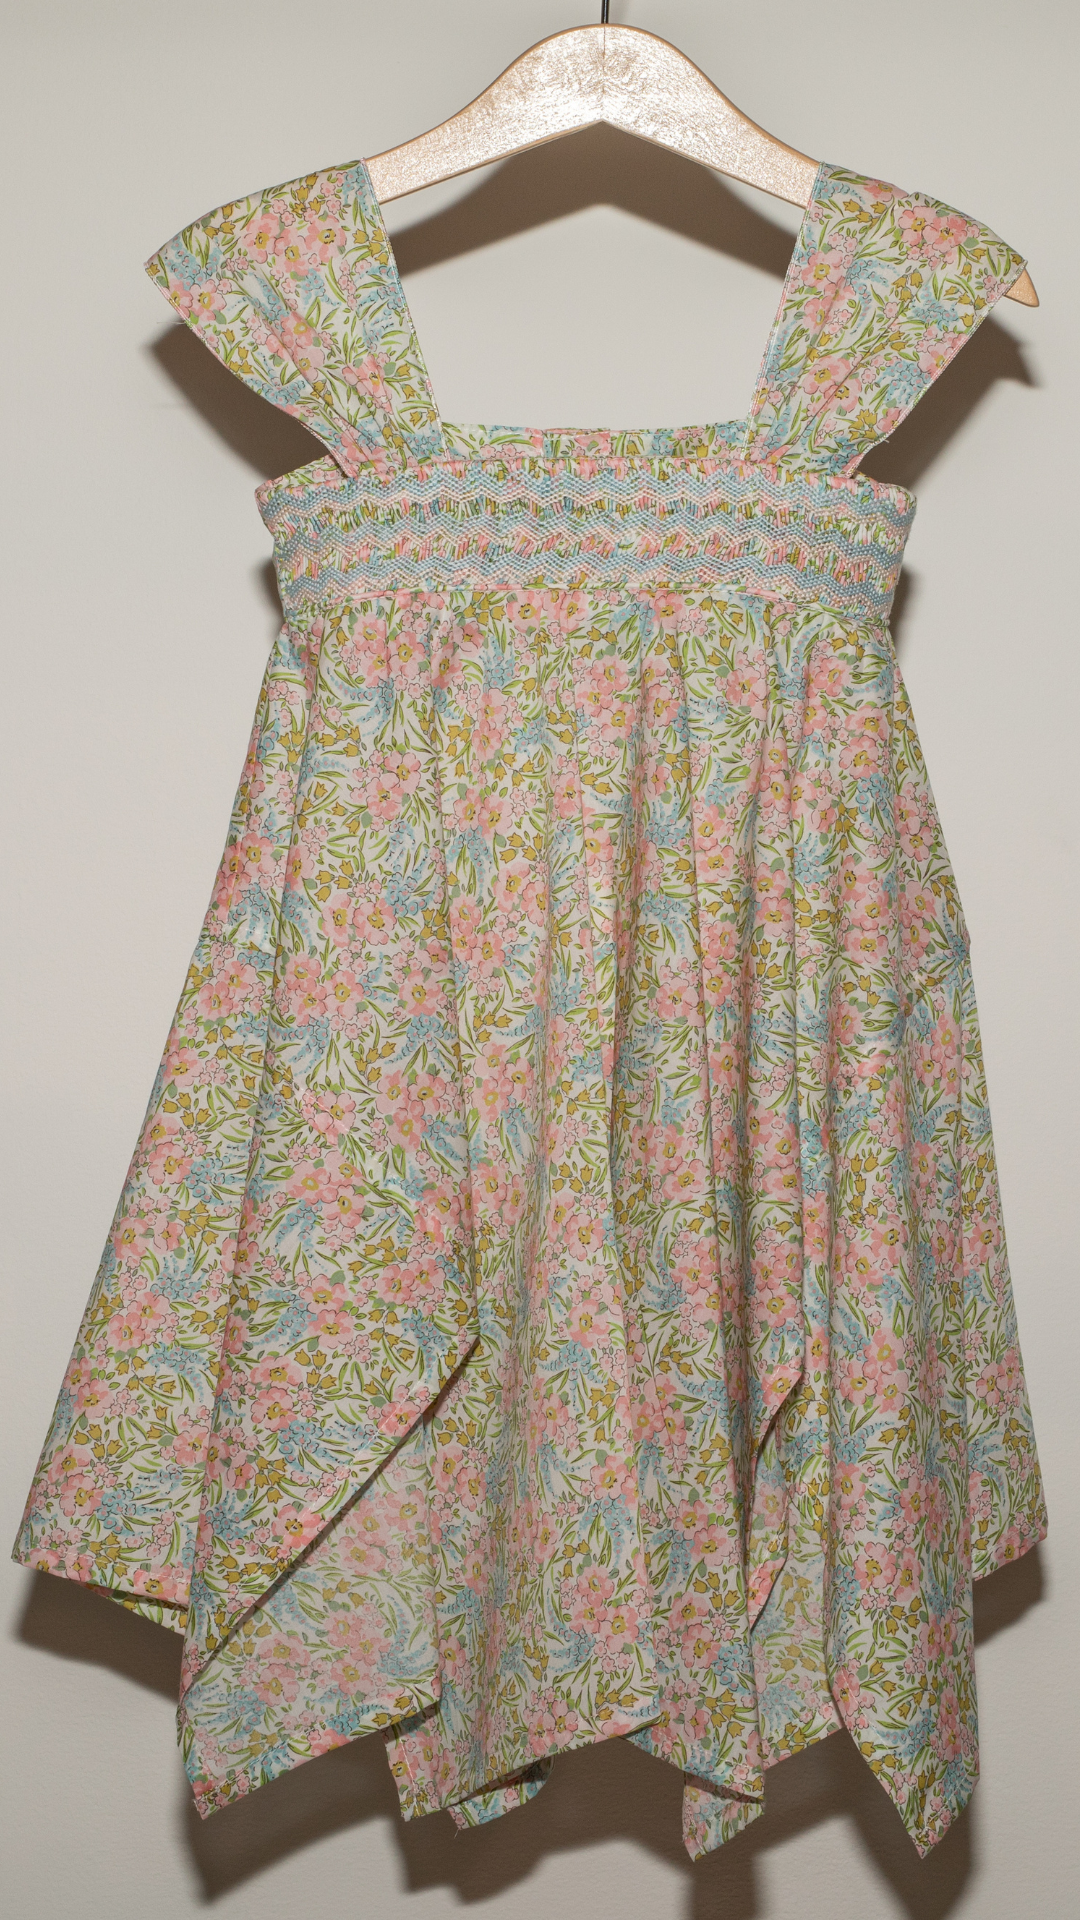 ASYMMETRIC STRAPPY HAND EMBROIDERED DRESS IN PINK LIBERTY FABRIC.